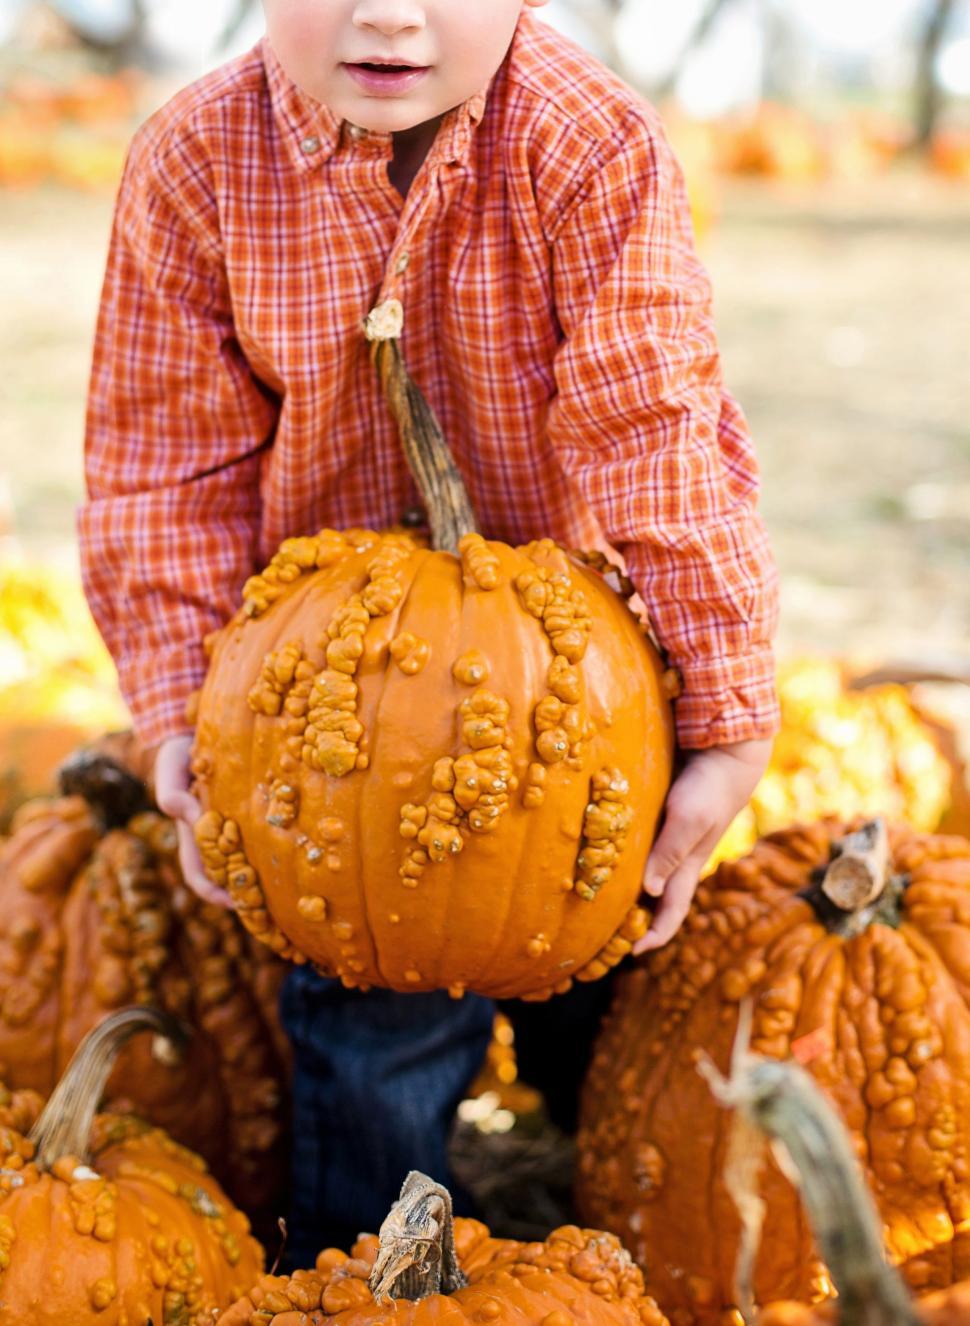 Free Image of Little Kid with Big Pumpkin  